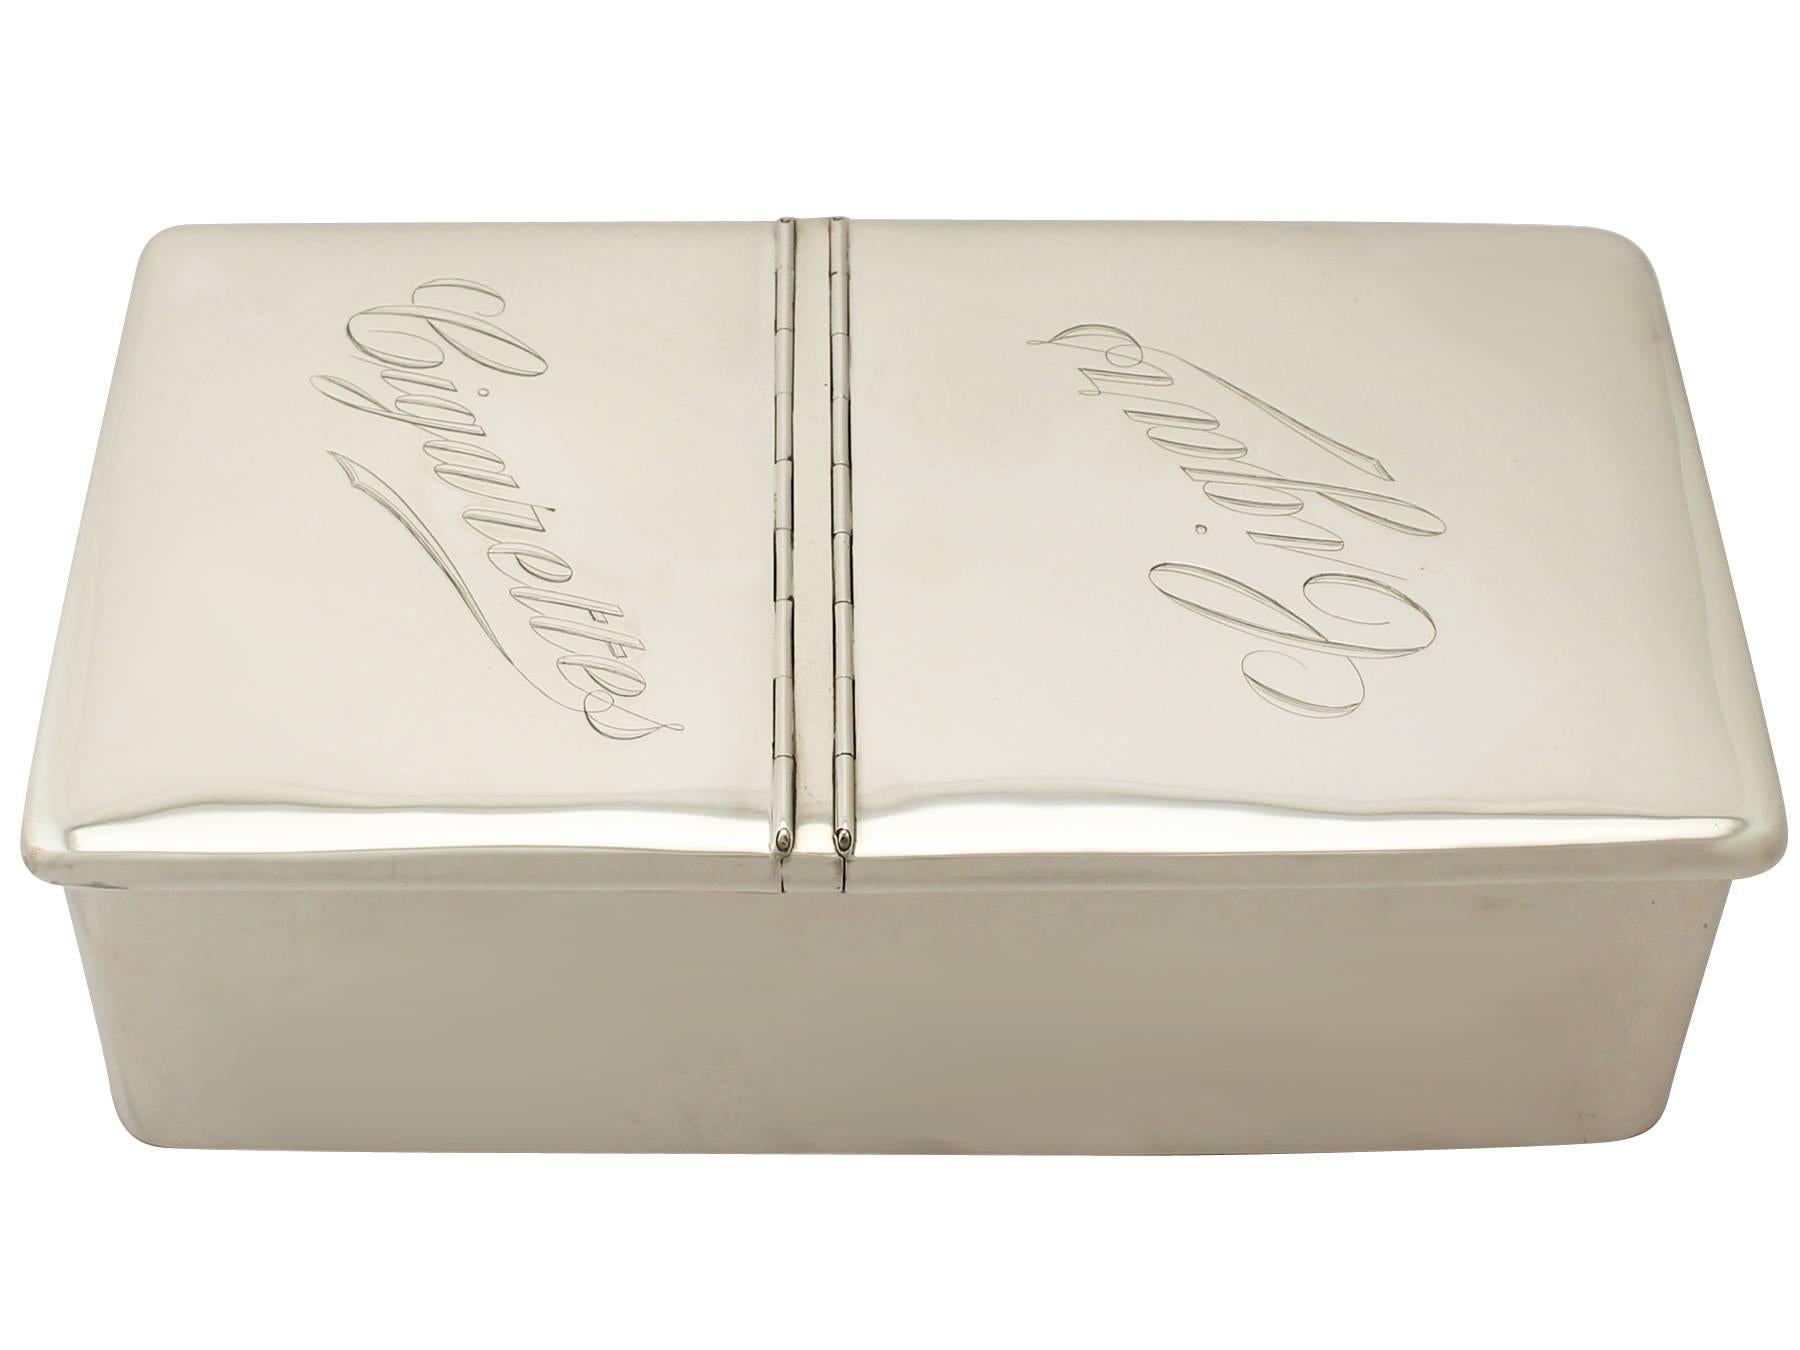 An exceptional, fine and impressive antique Edwardian English sterling silver cigarette/cigar box - boxed; an addition to the ornamental silverware collection.

This exceptional antique Edwardian sterling silver cigarette box has a plain rectangular